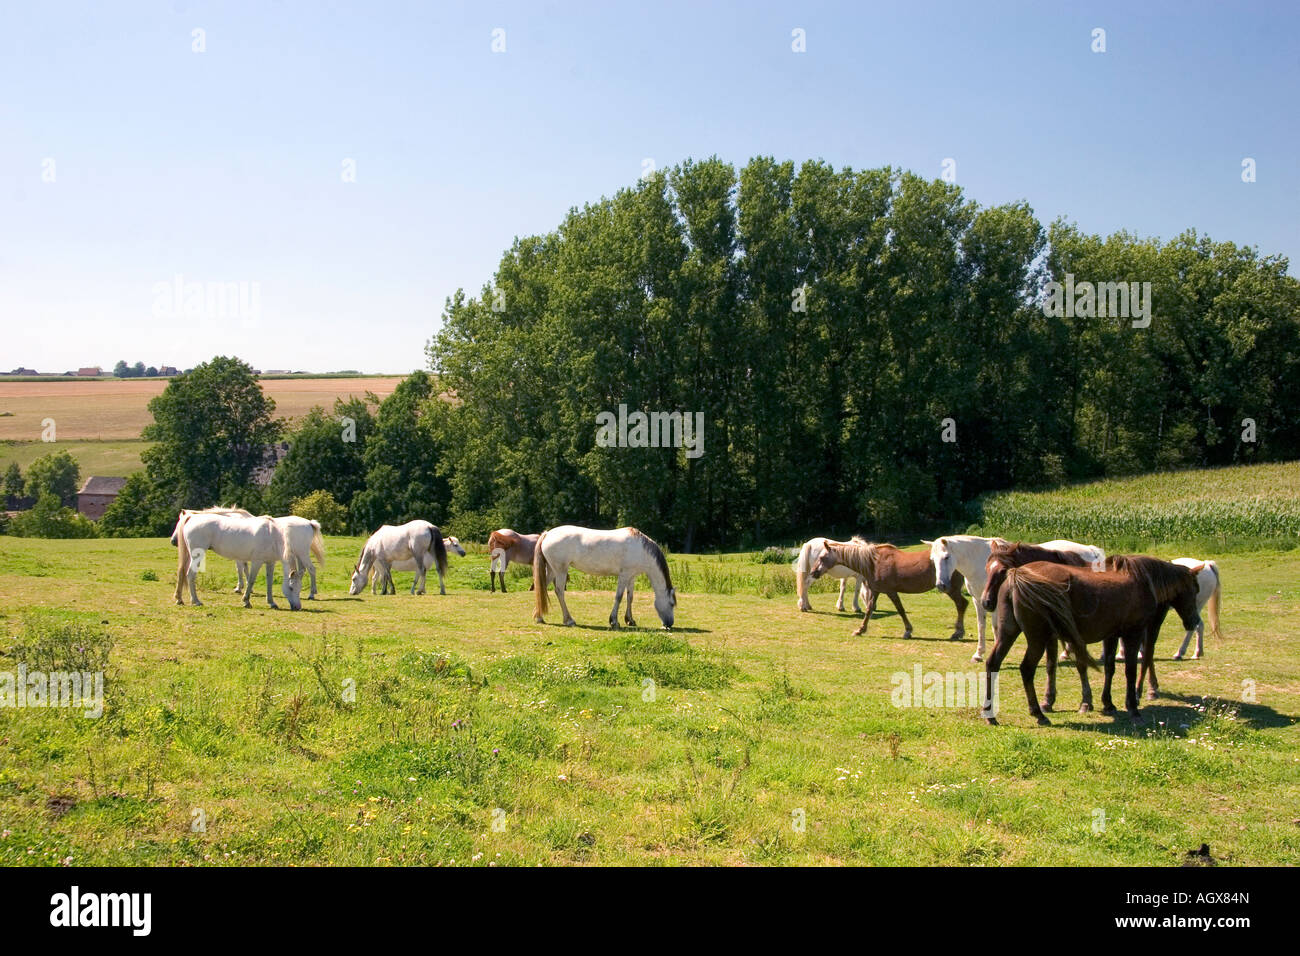 Horse graze in the french countryside near Vervins in the region of Picardie France Stock Photo